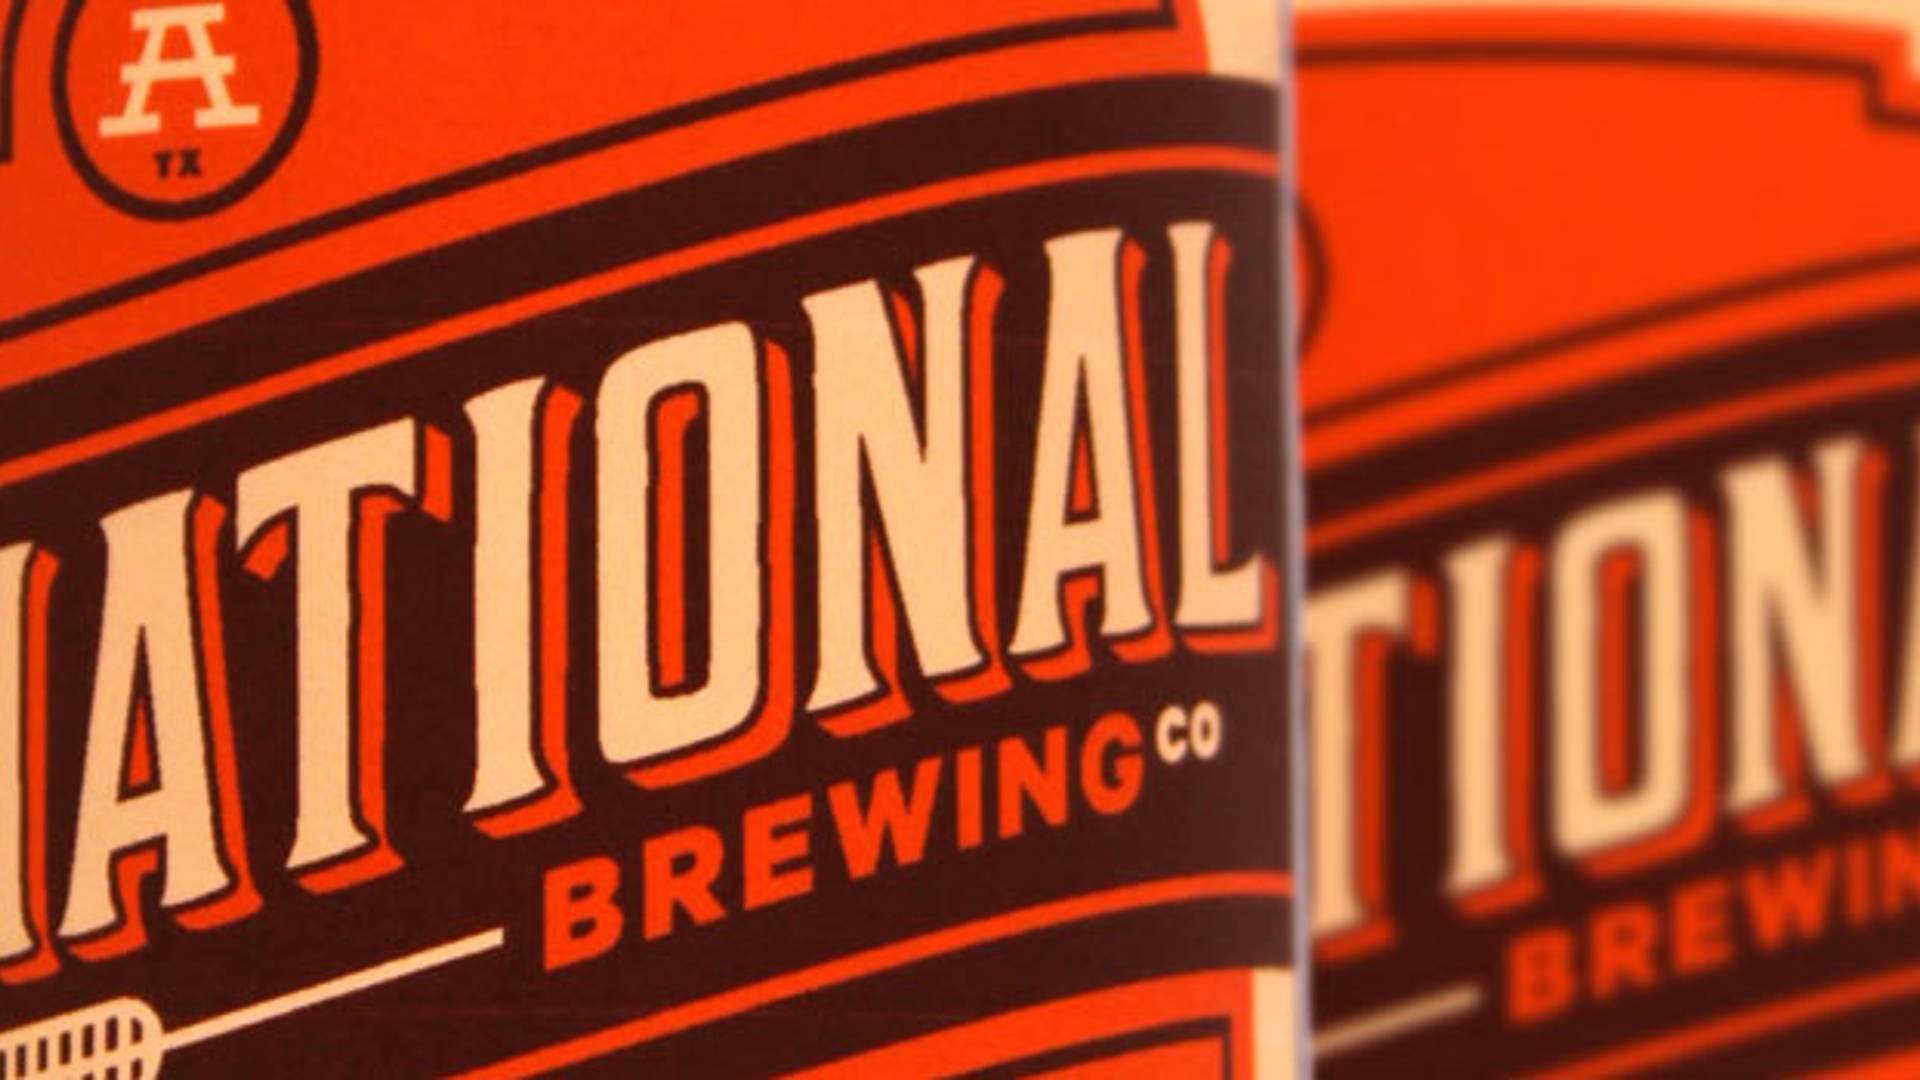 Featured image for Student Spotlight: National Brewing Company